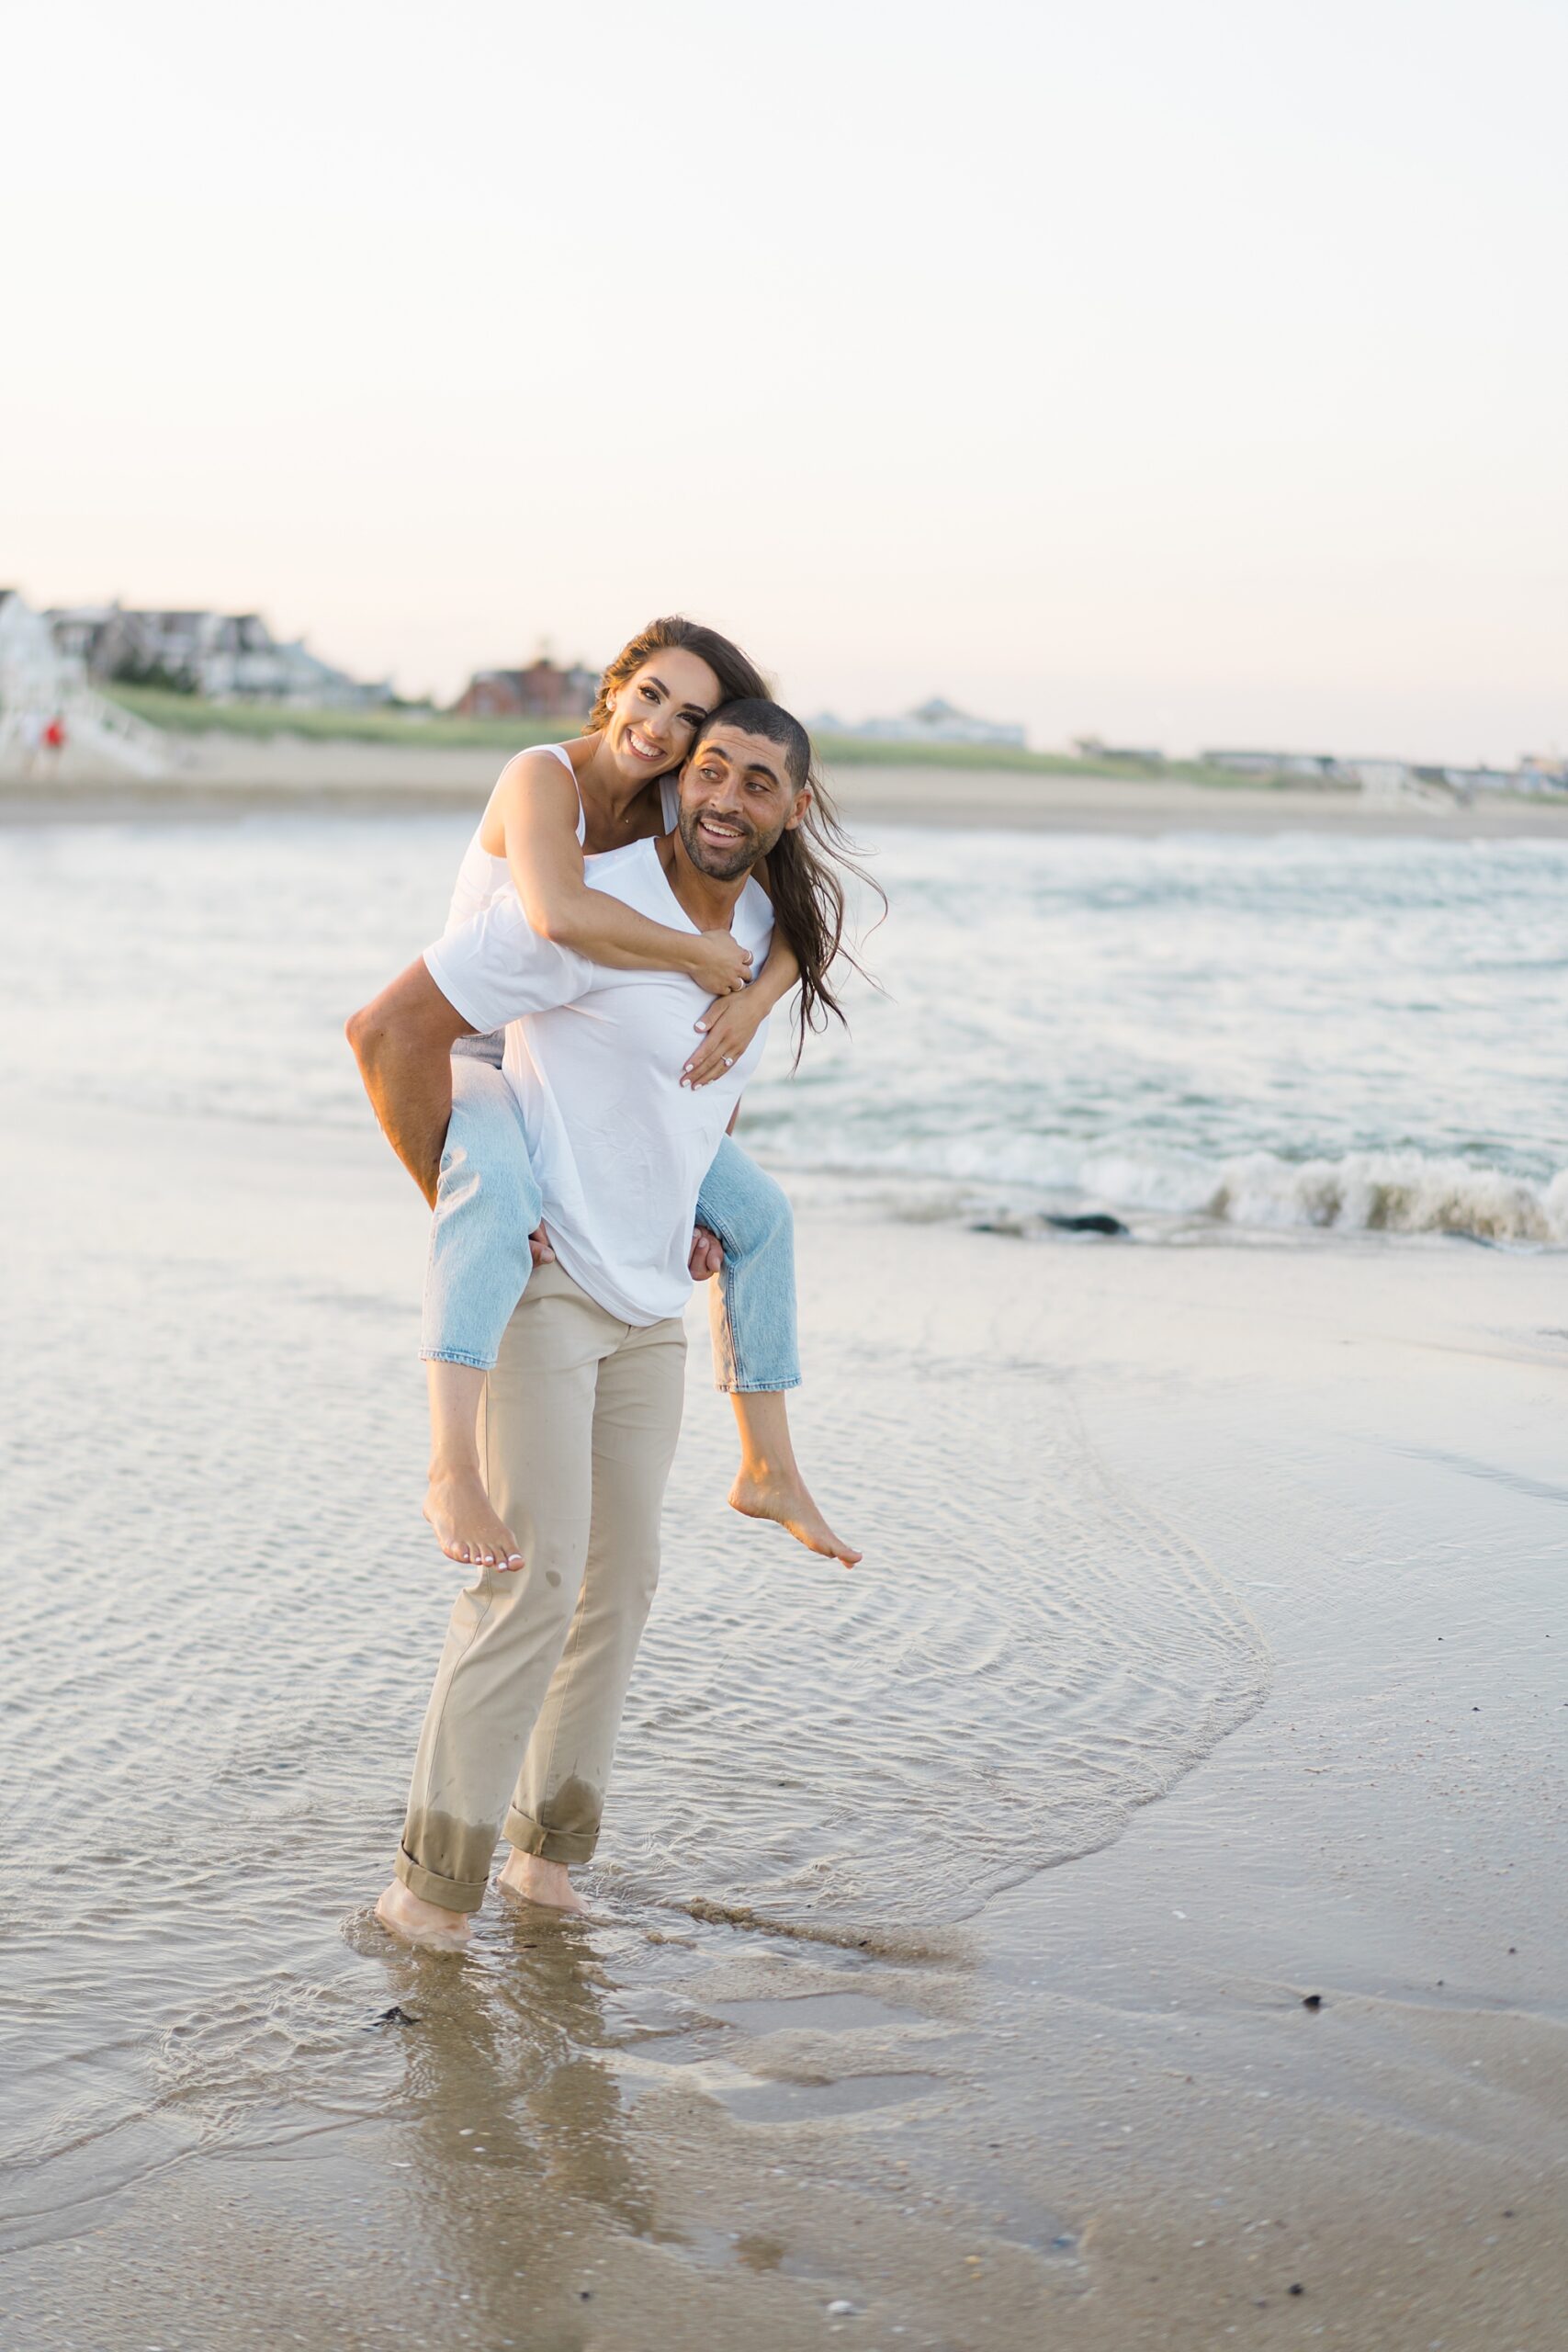 9 Styling Tips for What to Wear in your Engagement Photos